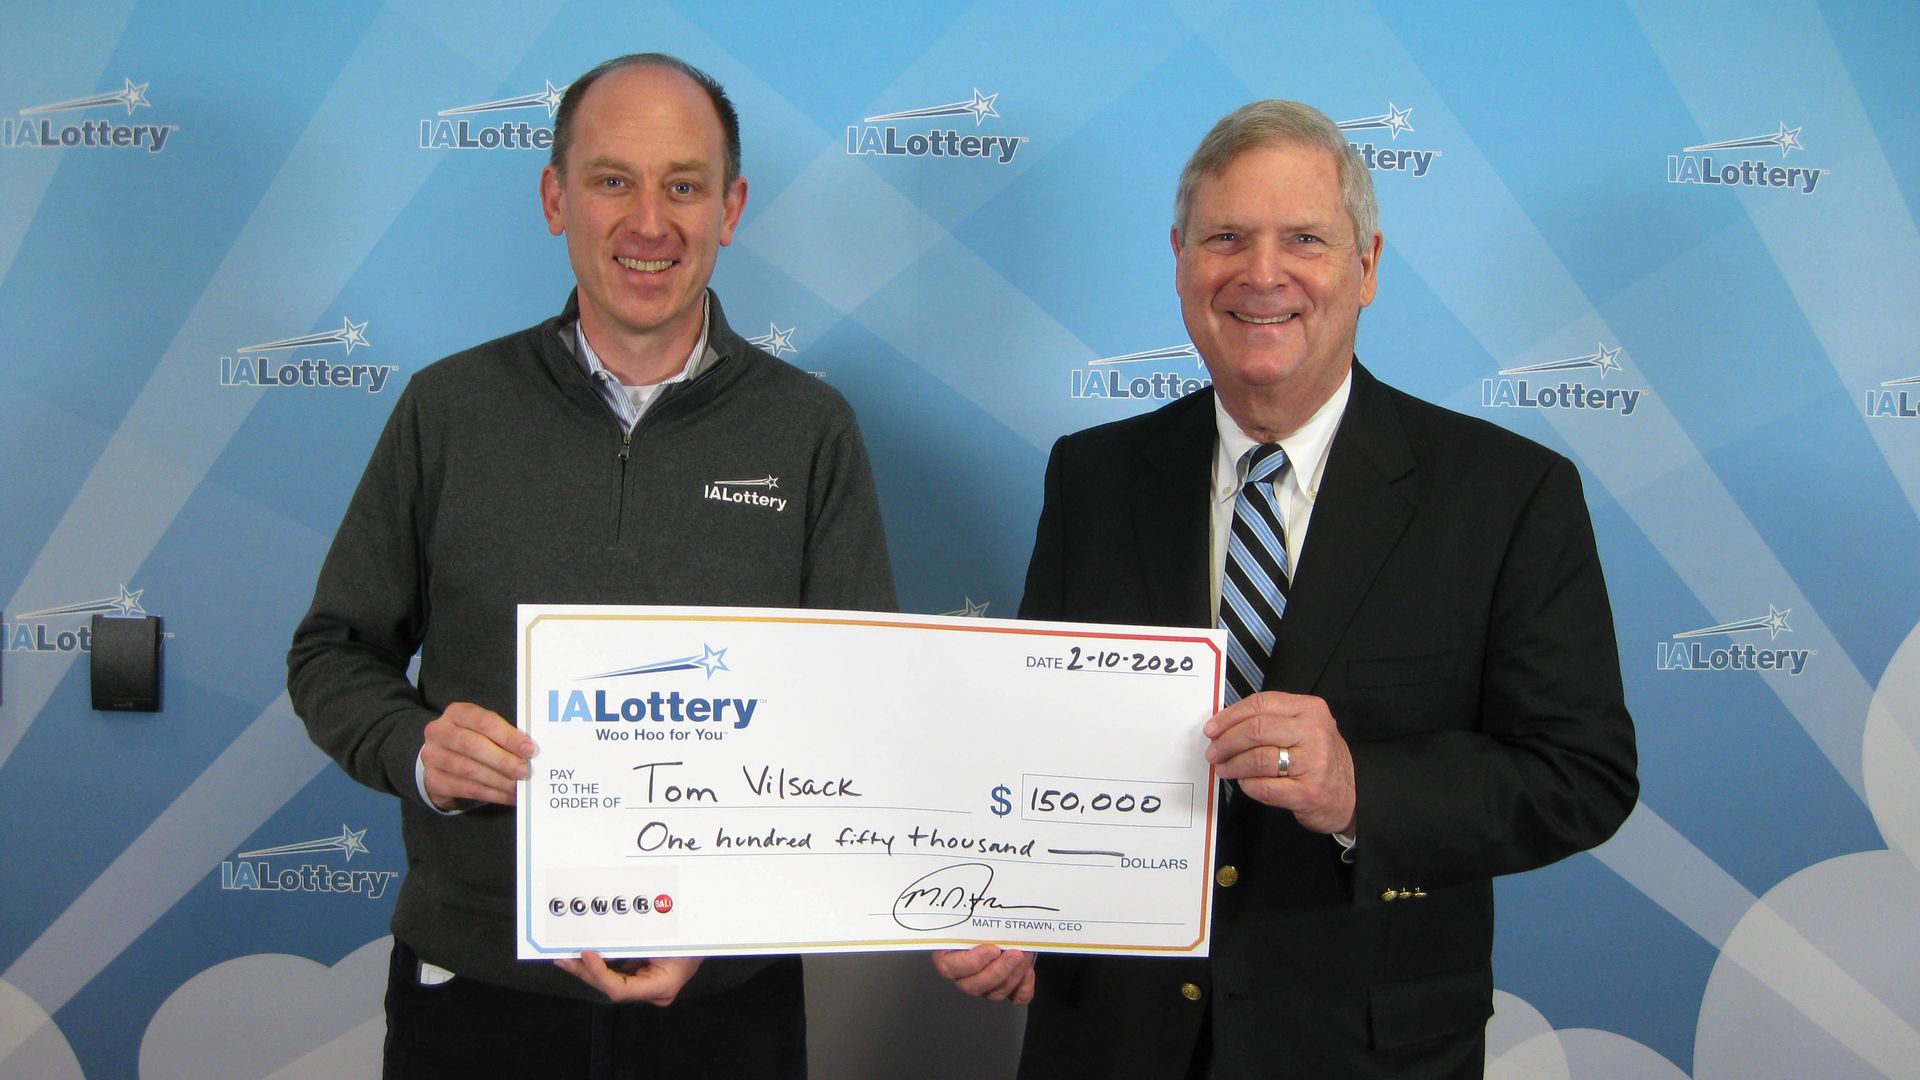 Tom Vilsack wins the lottery